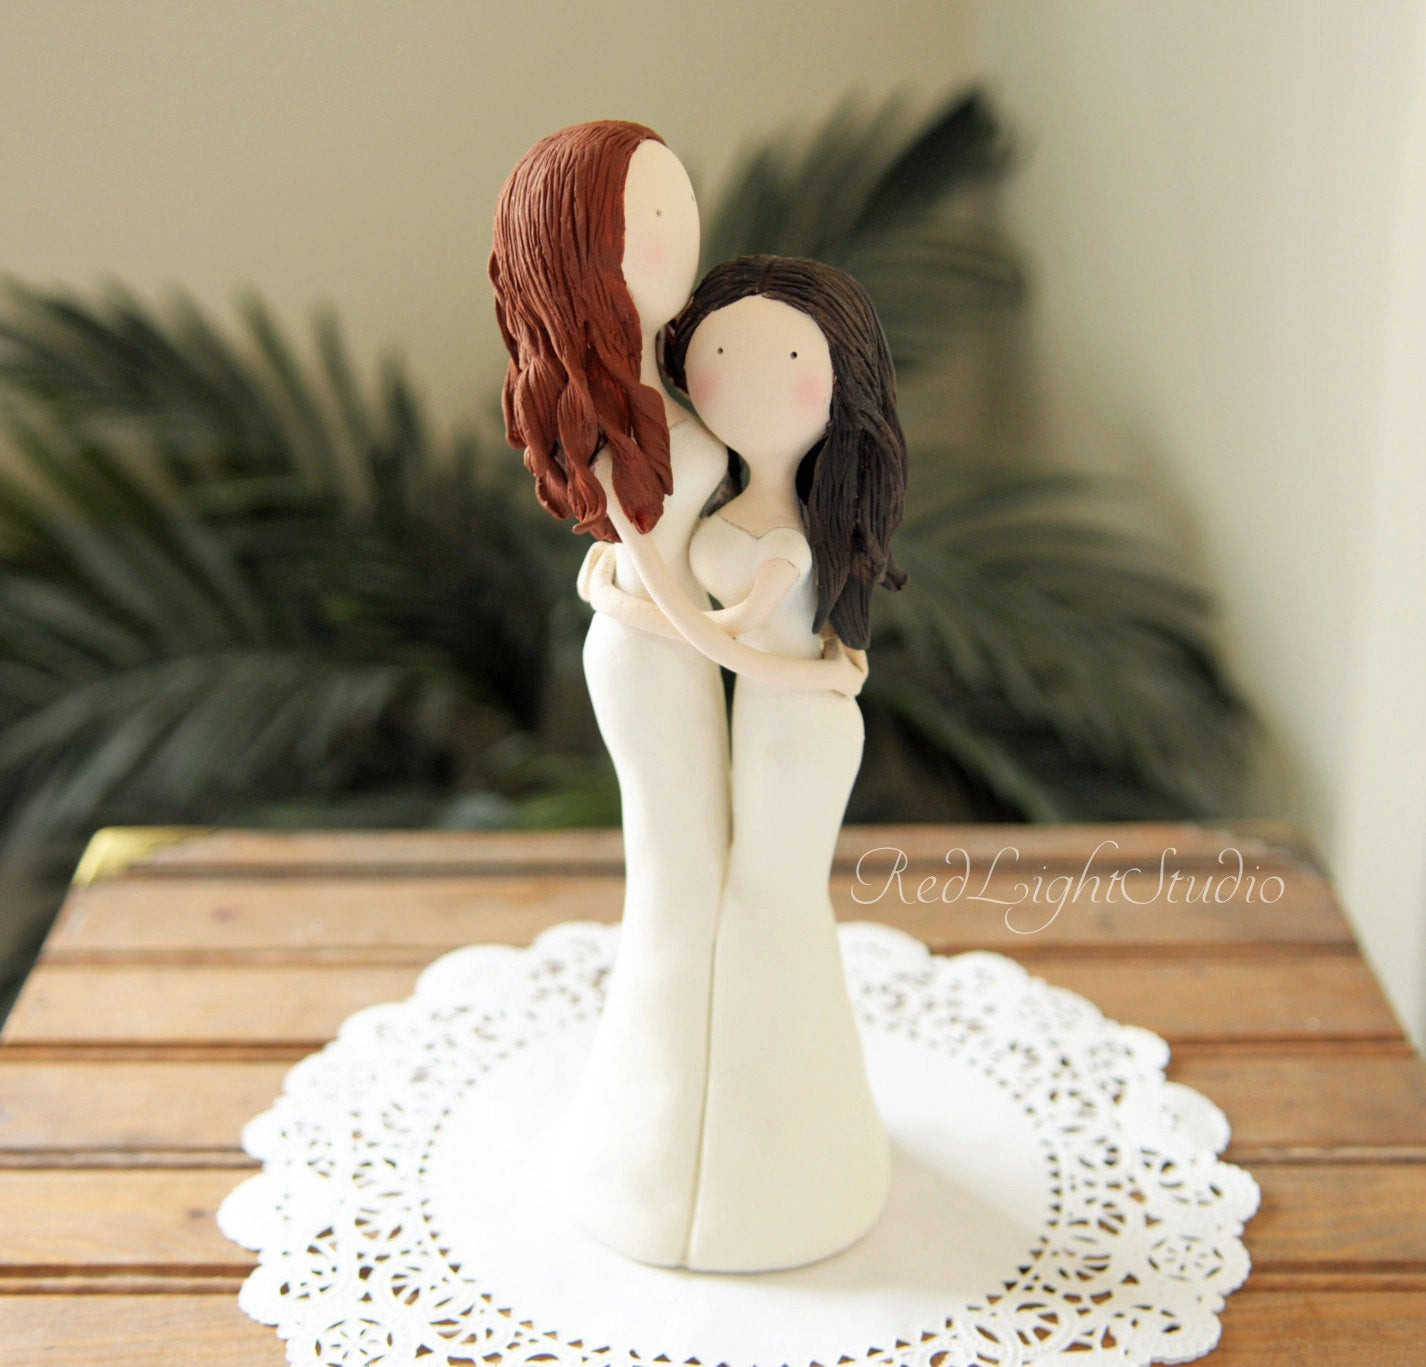 Lesbian Wedding Cake Topper
 Same Wedding Cake Toppers Couple Sculpture